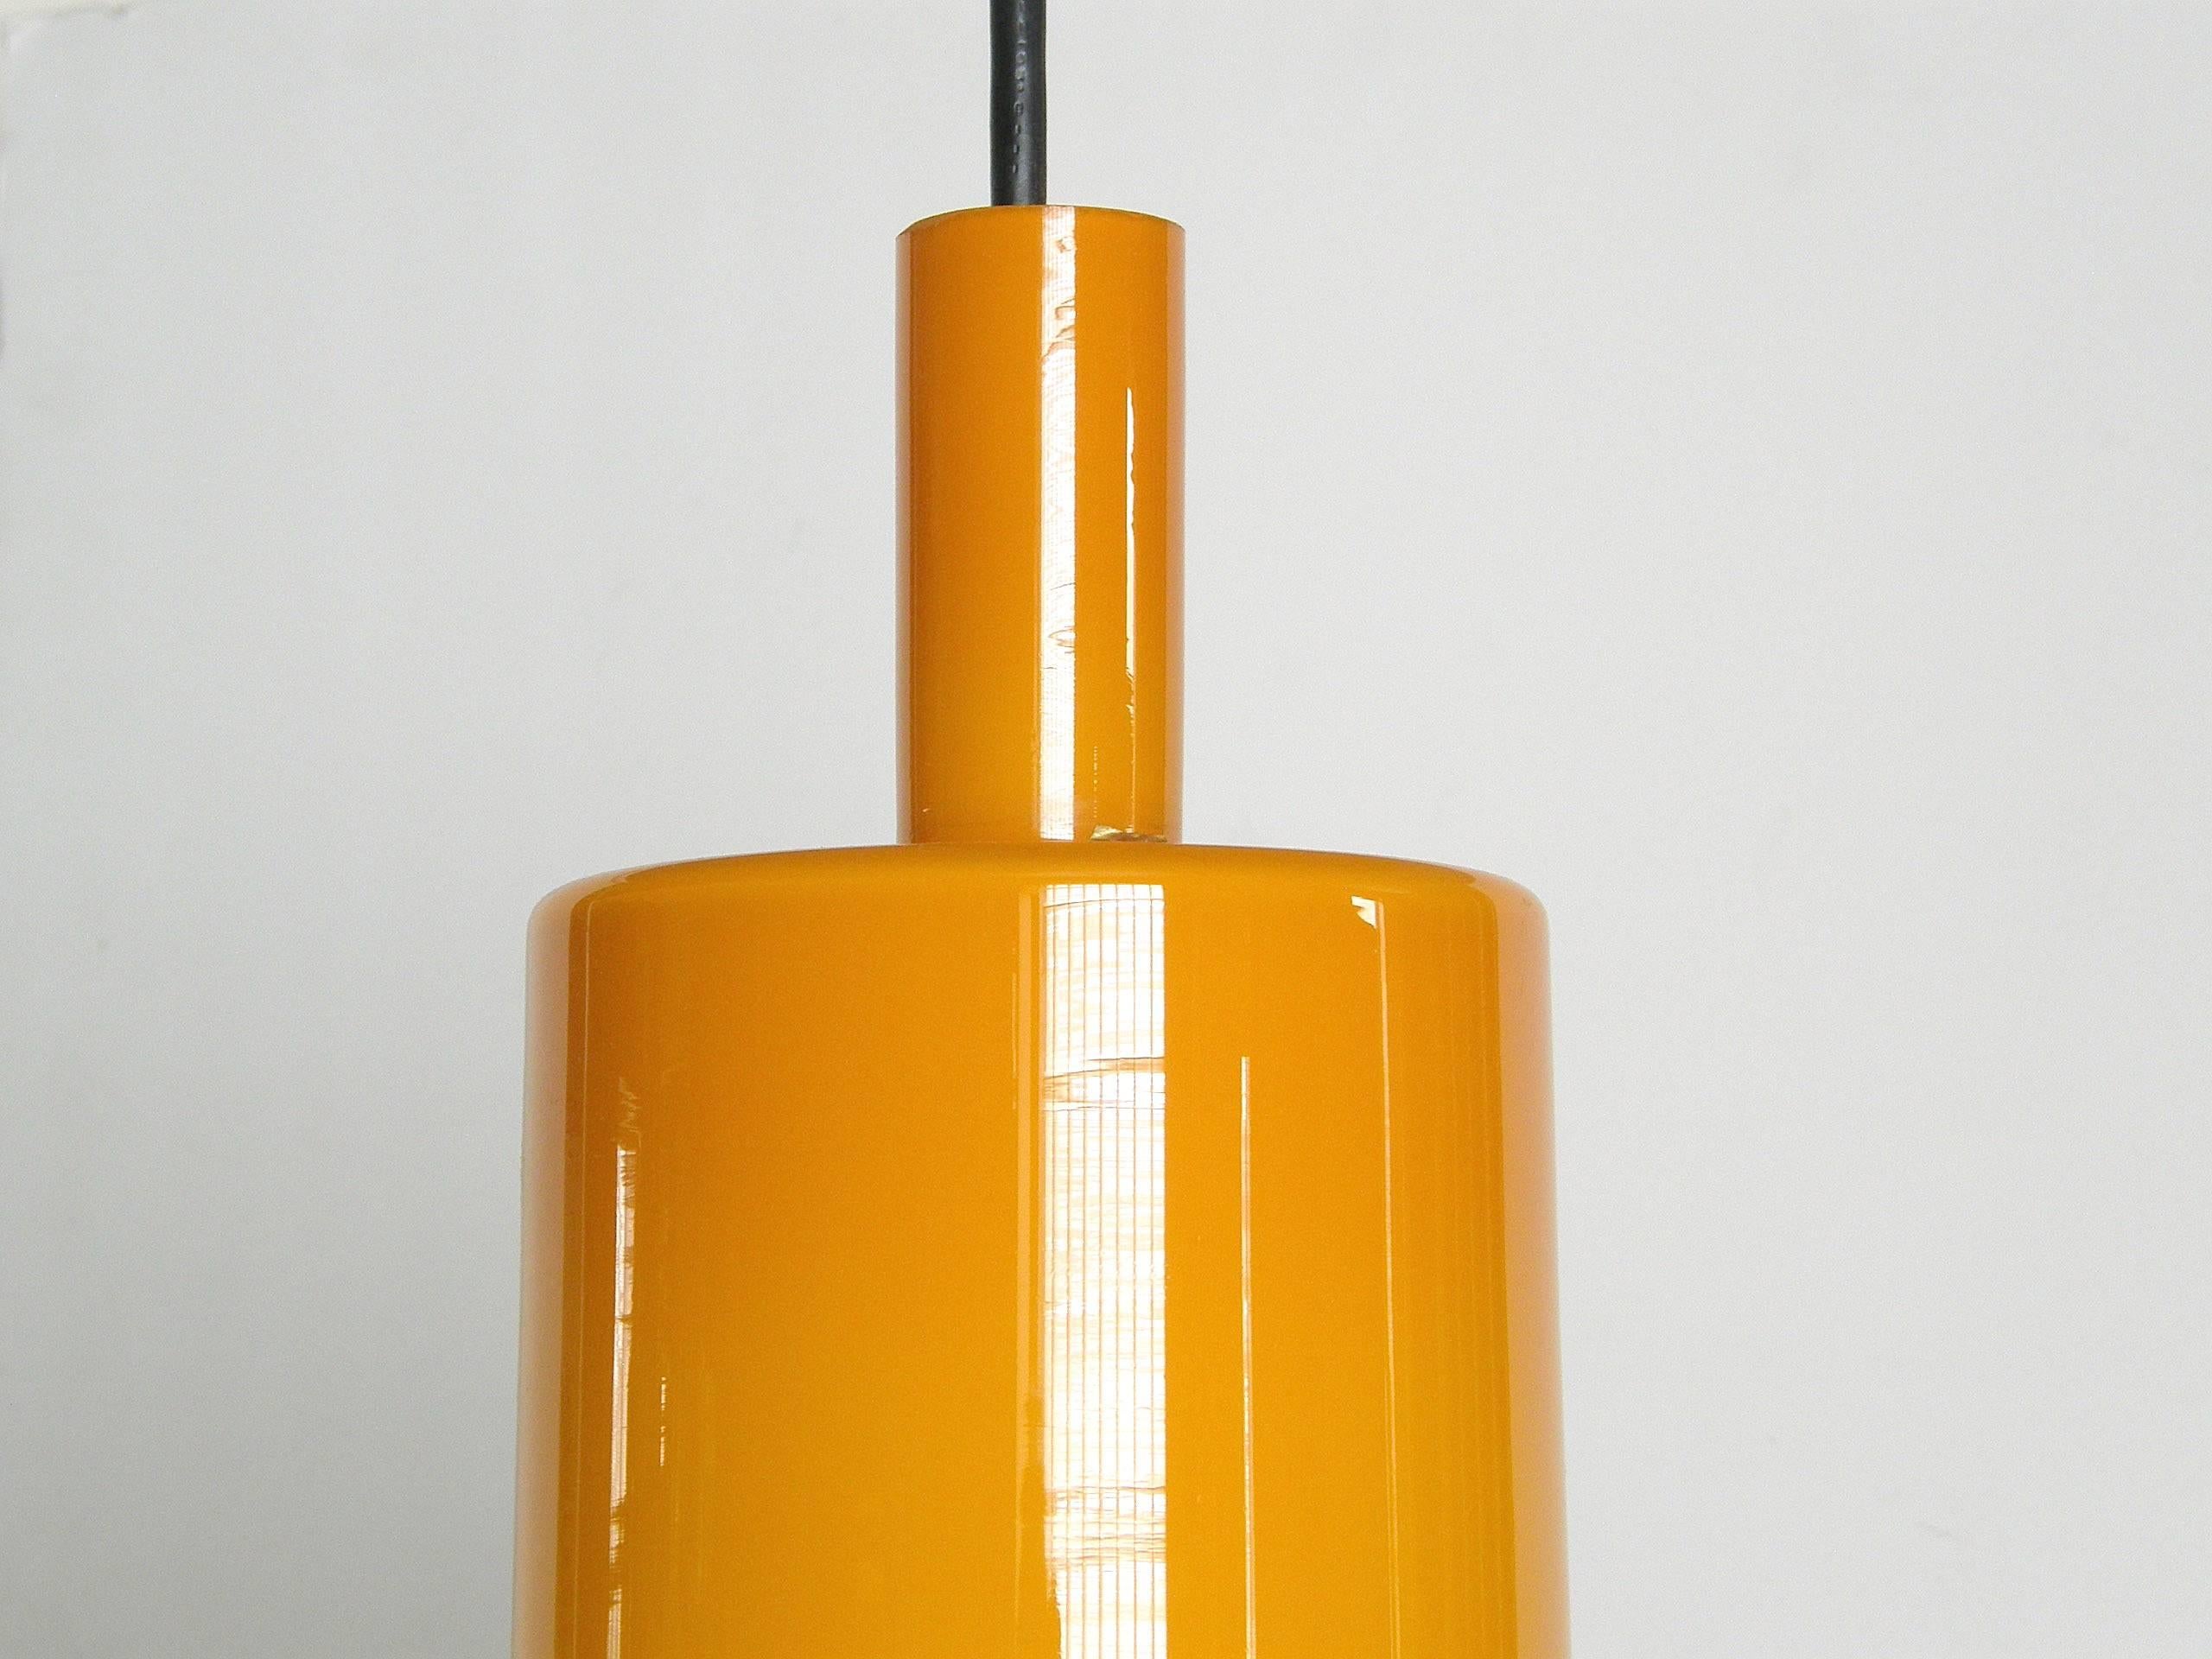 This new/old stock glass ceiling fixture was designed by Jo Hammerborg for Fog & Mørup of Denmark. The glass shade was made by Holmegaard in bright orange cased in white, and it has a warm glow when lit. It retains its manufacturer's stickers and